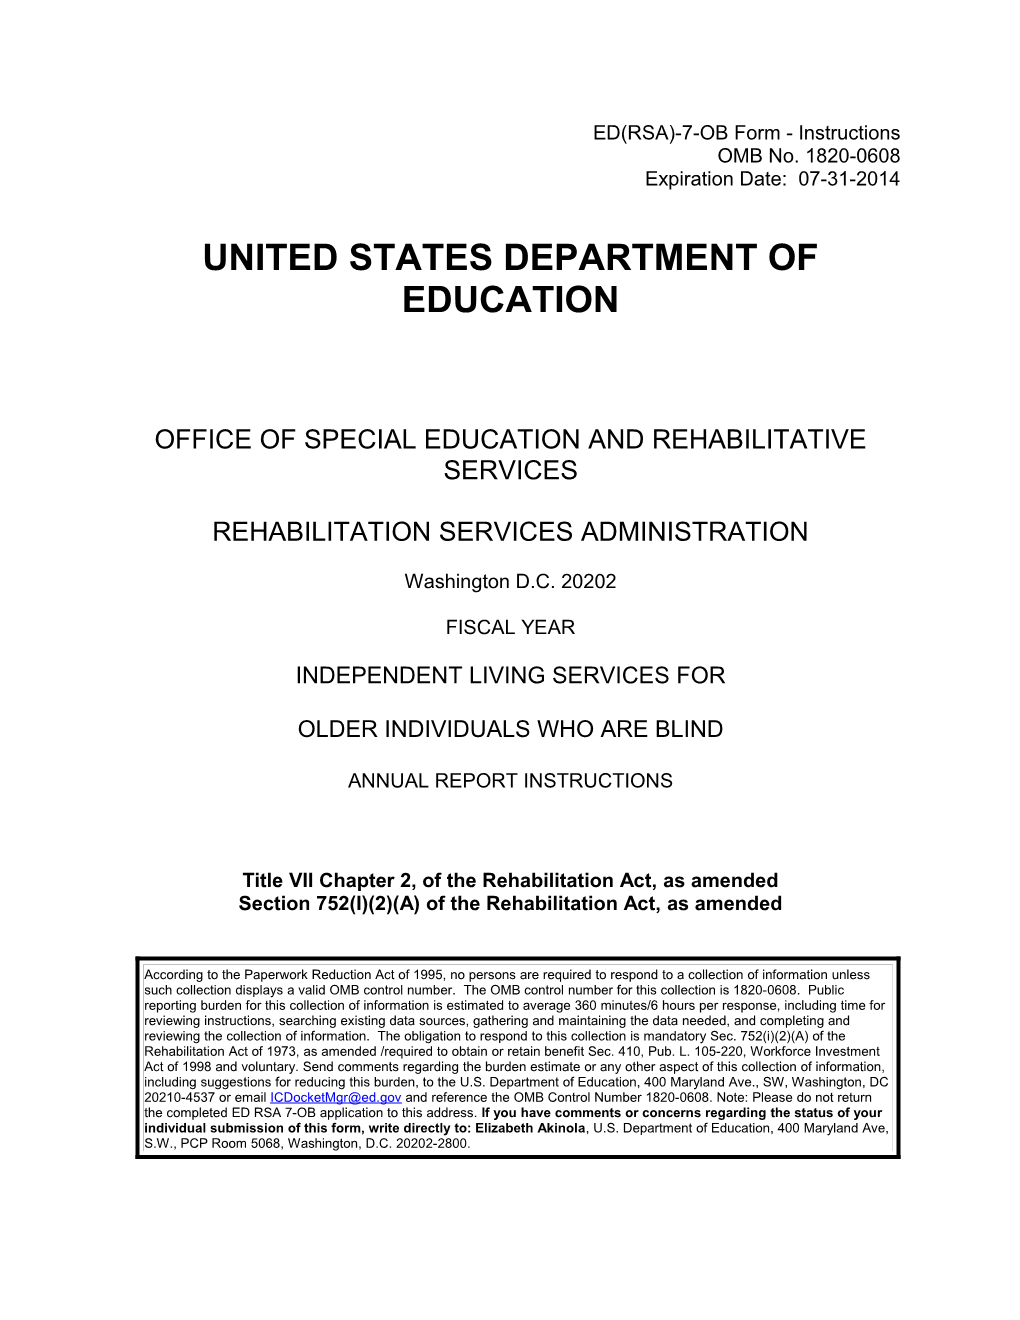 United States Department of Education s5